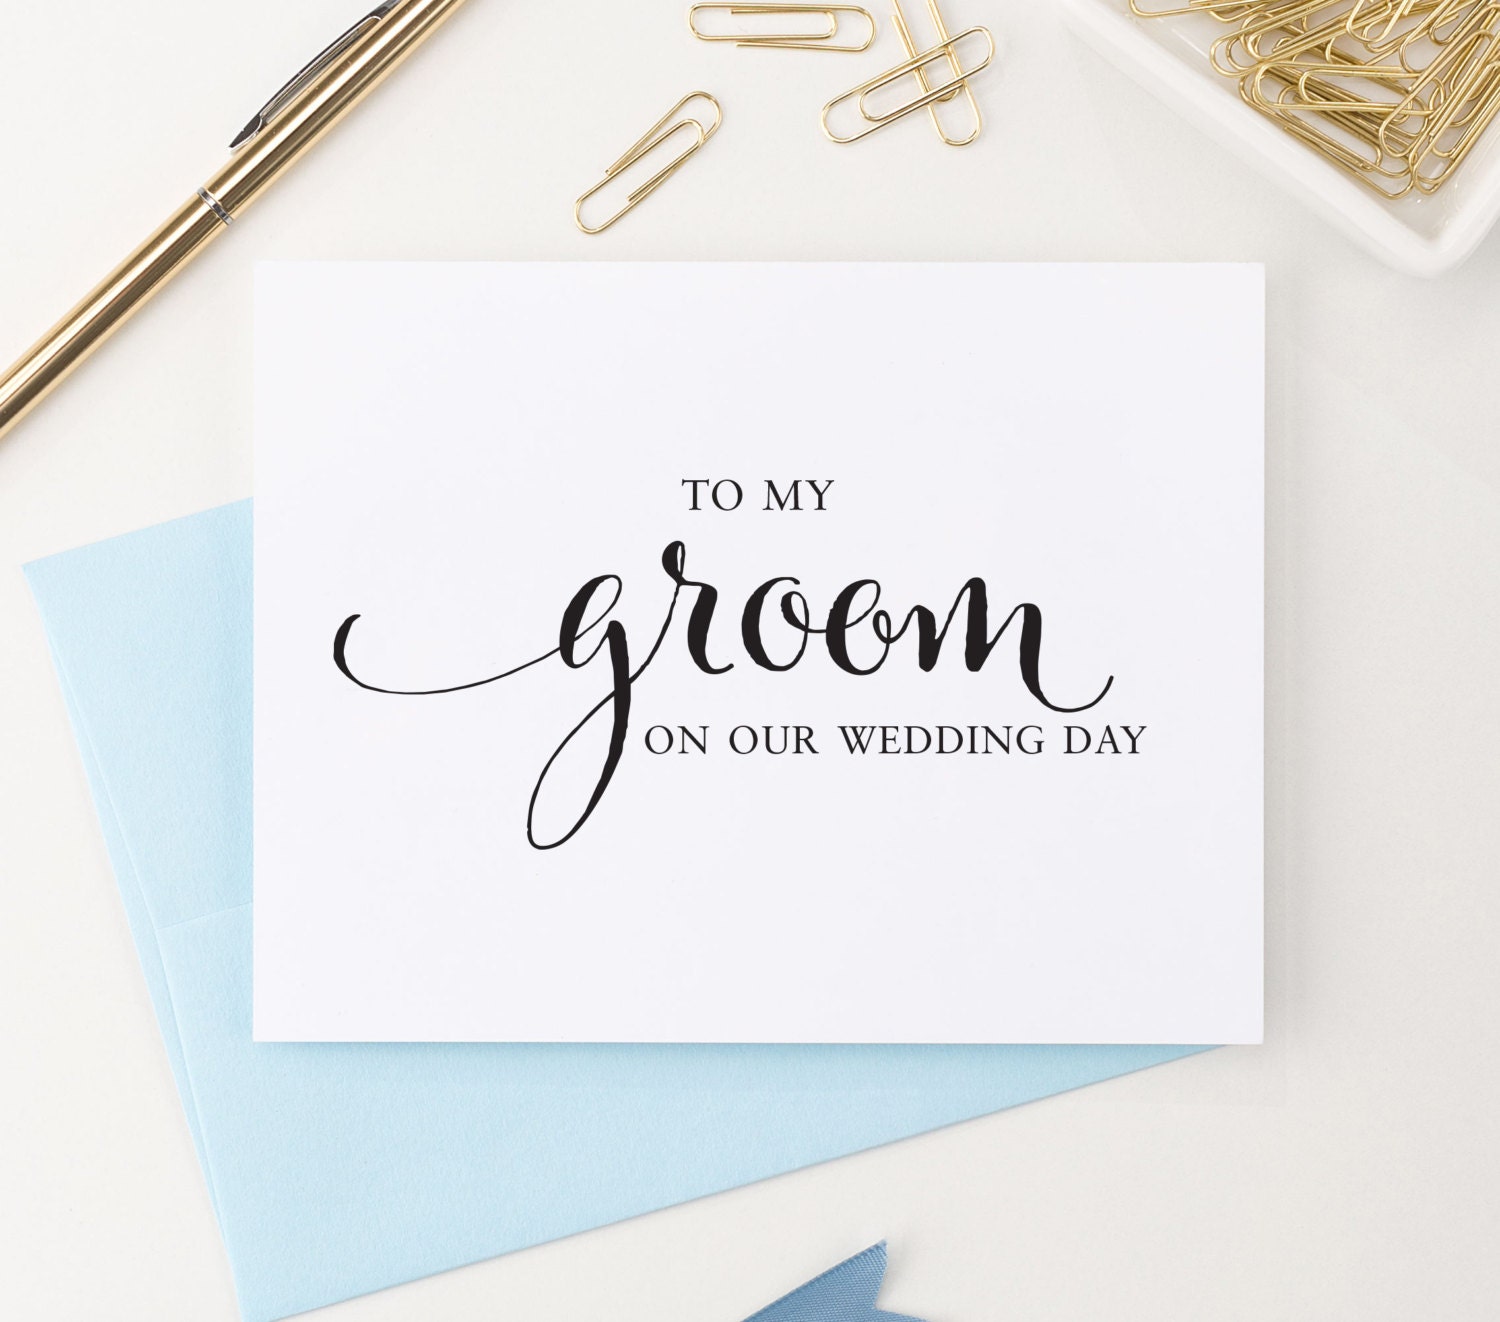 to-my-groom-on-our-wedding-day-card-to-my-groom-card-wedding